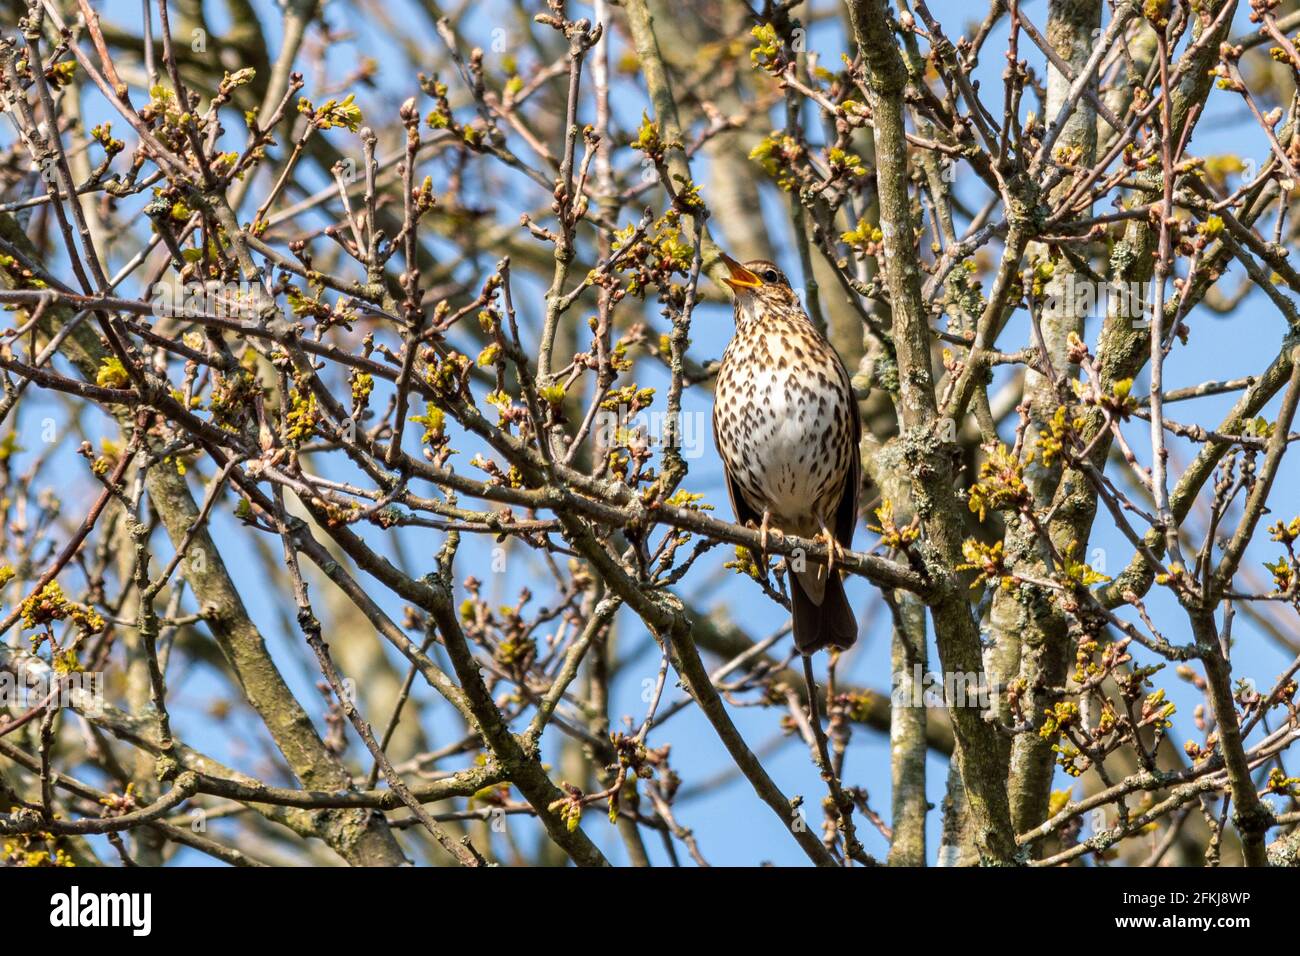 May 2nd, 2021. International Dawn Chorus Day is held on the first Sunday of May each year. People are encouraged to go out early in the morning to see and listen to the birds singing and to celebrate nature's great symphony. Pictured is a song thrush (Turdus philomelos) singing at Fleet Pond Local Nature Reserve in Hampshire, England, UK. Stock Photo